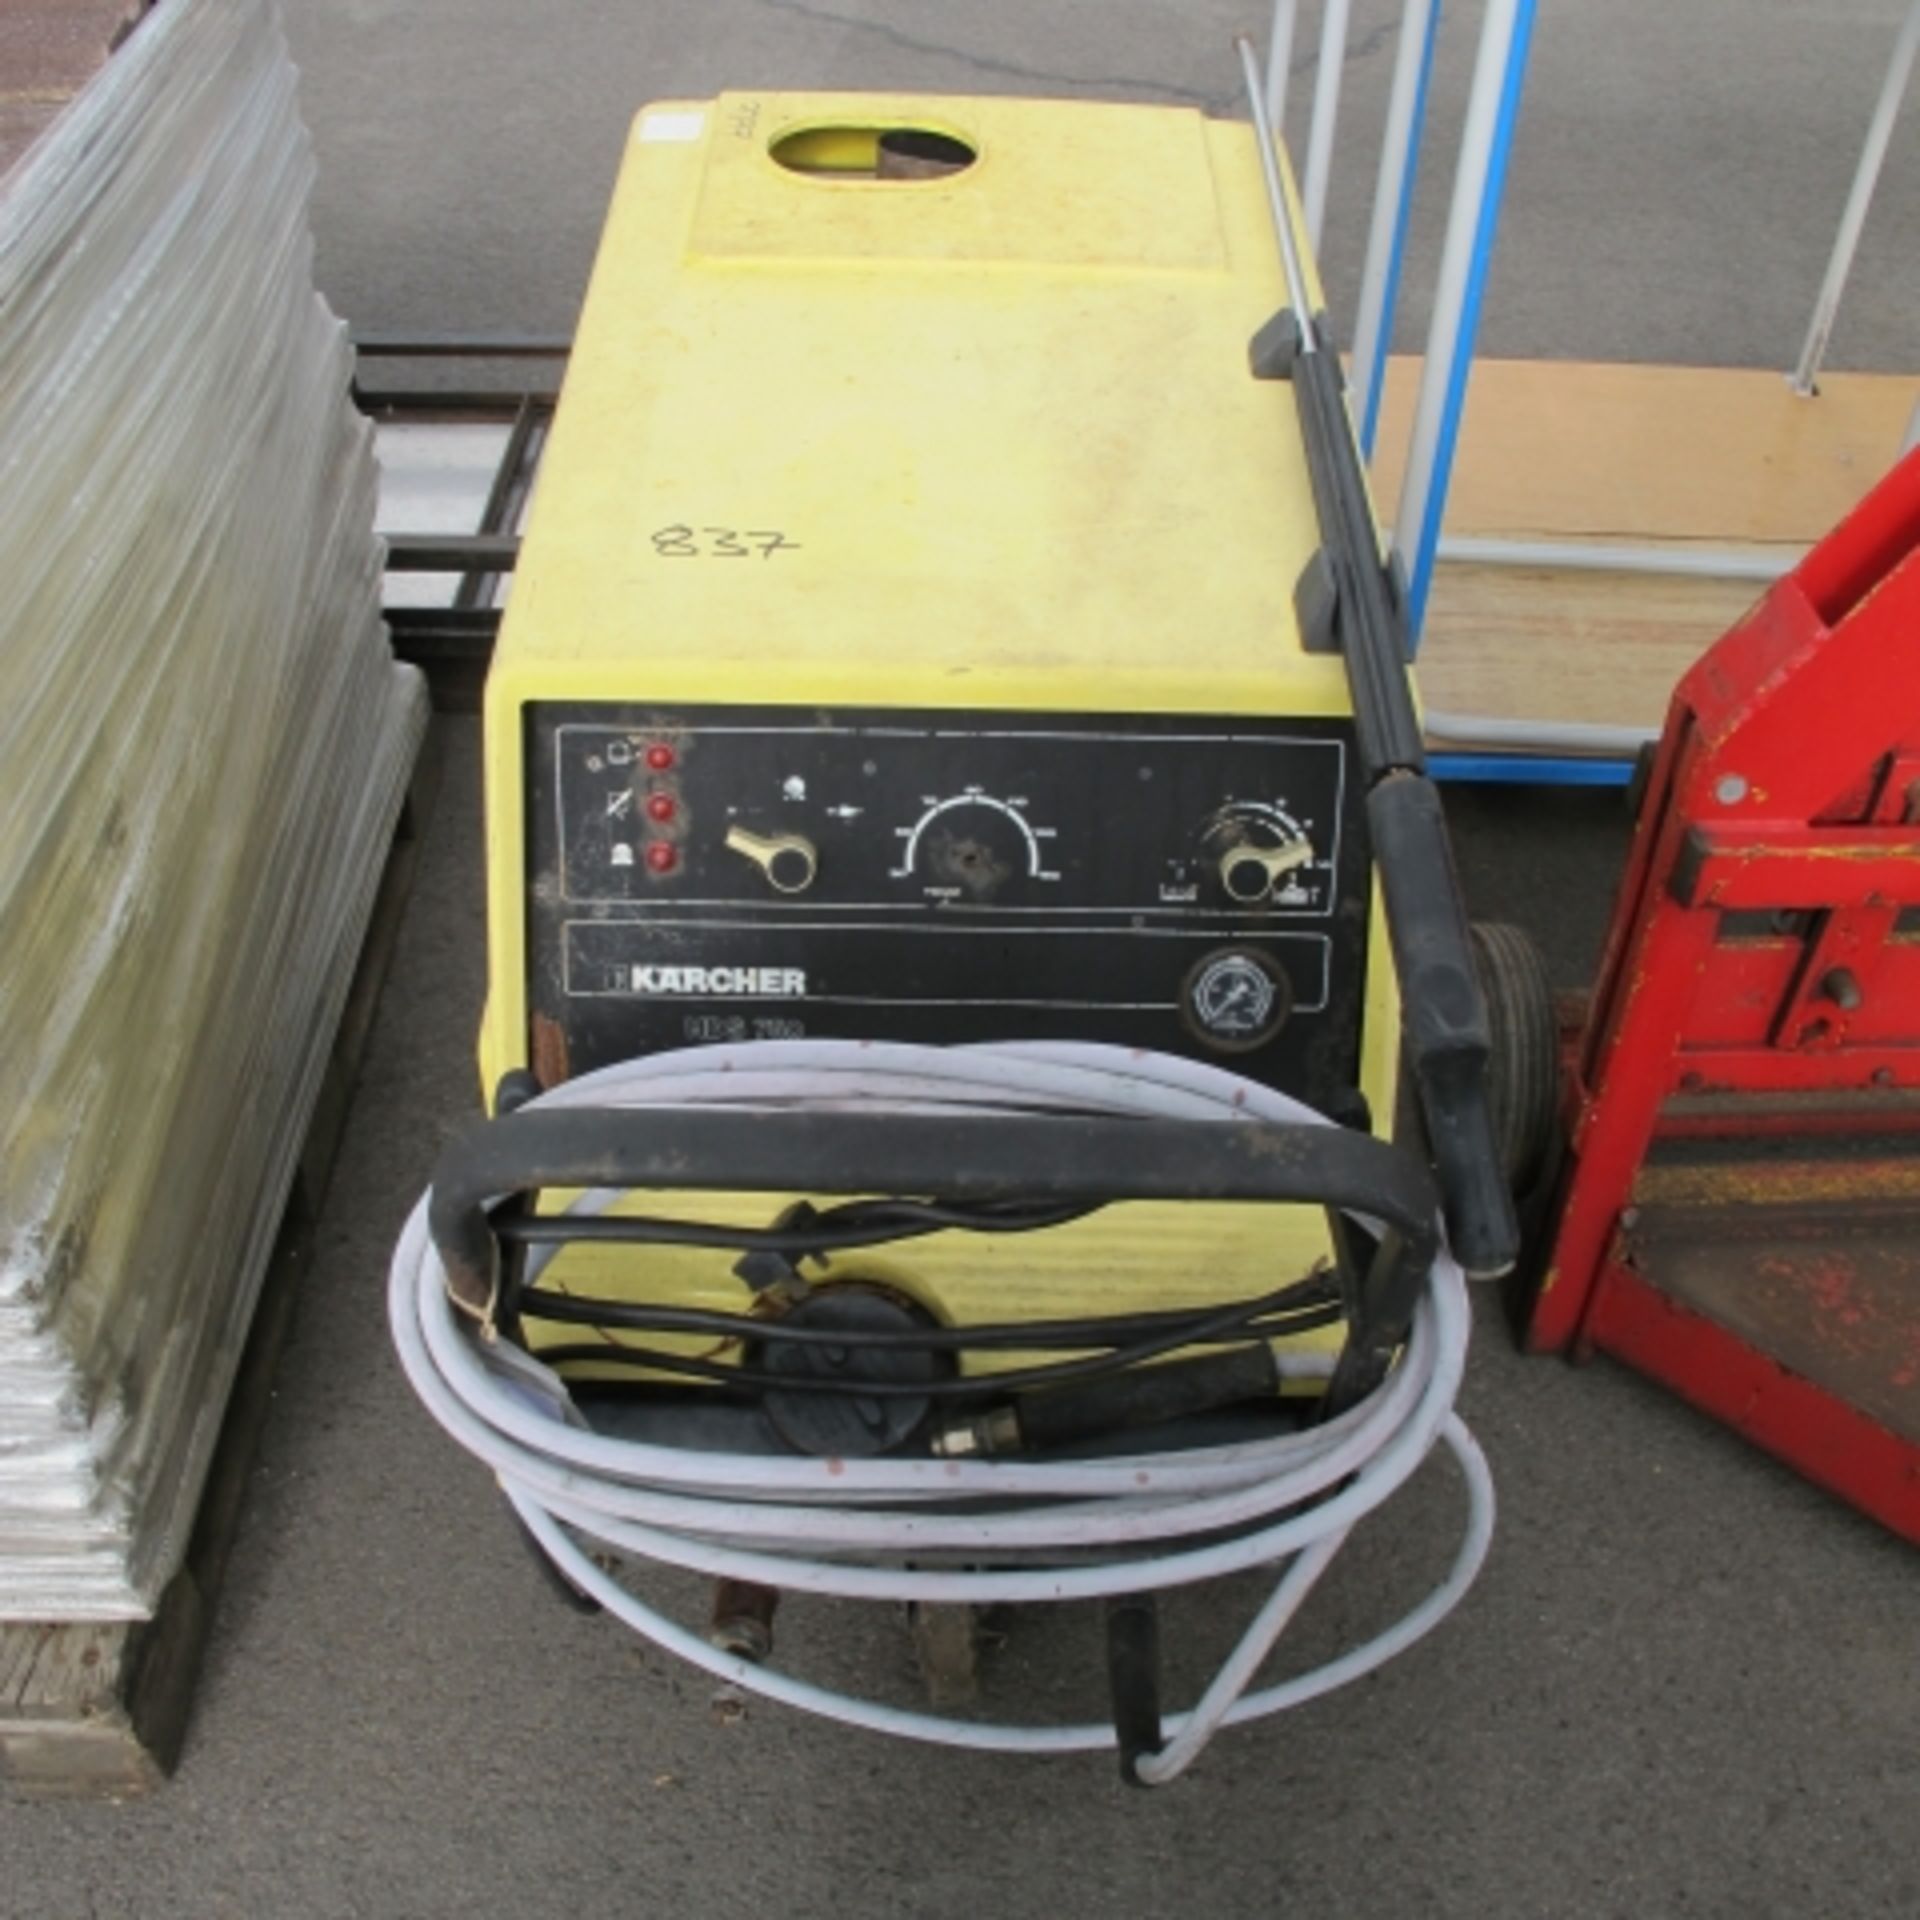 A Karcher HDS 750 steam cleaner (spares or repair) Please note, there is a £5 plus VAT handling